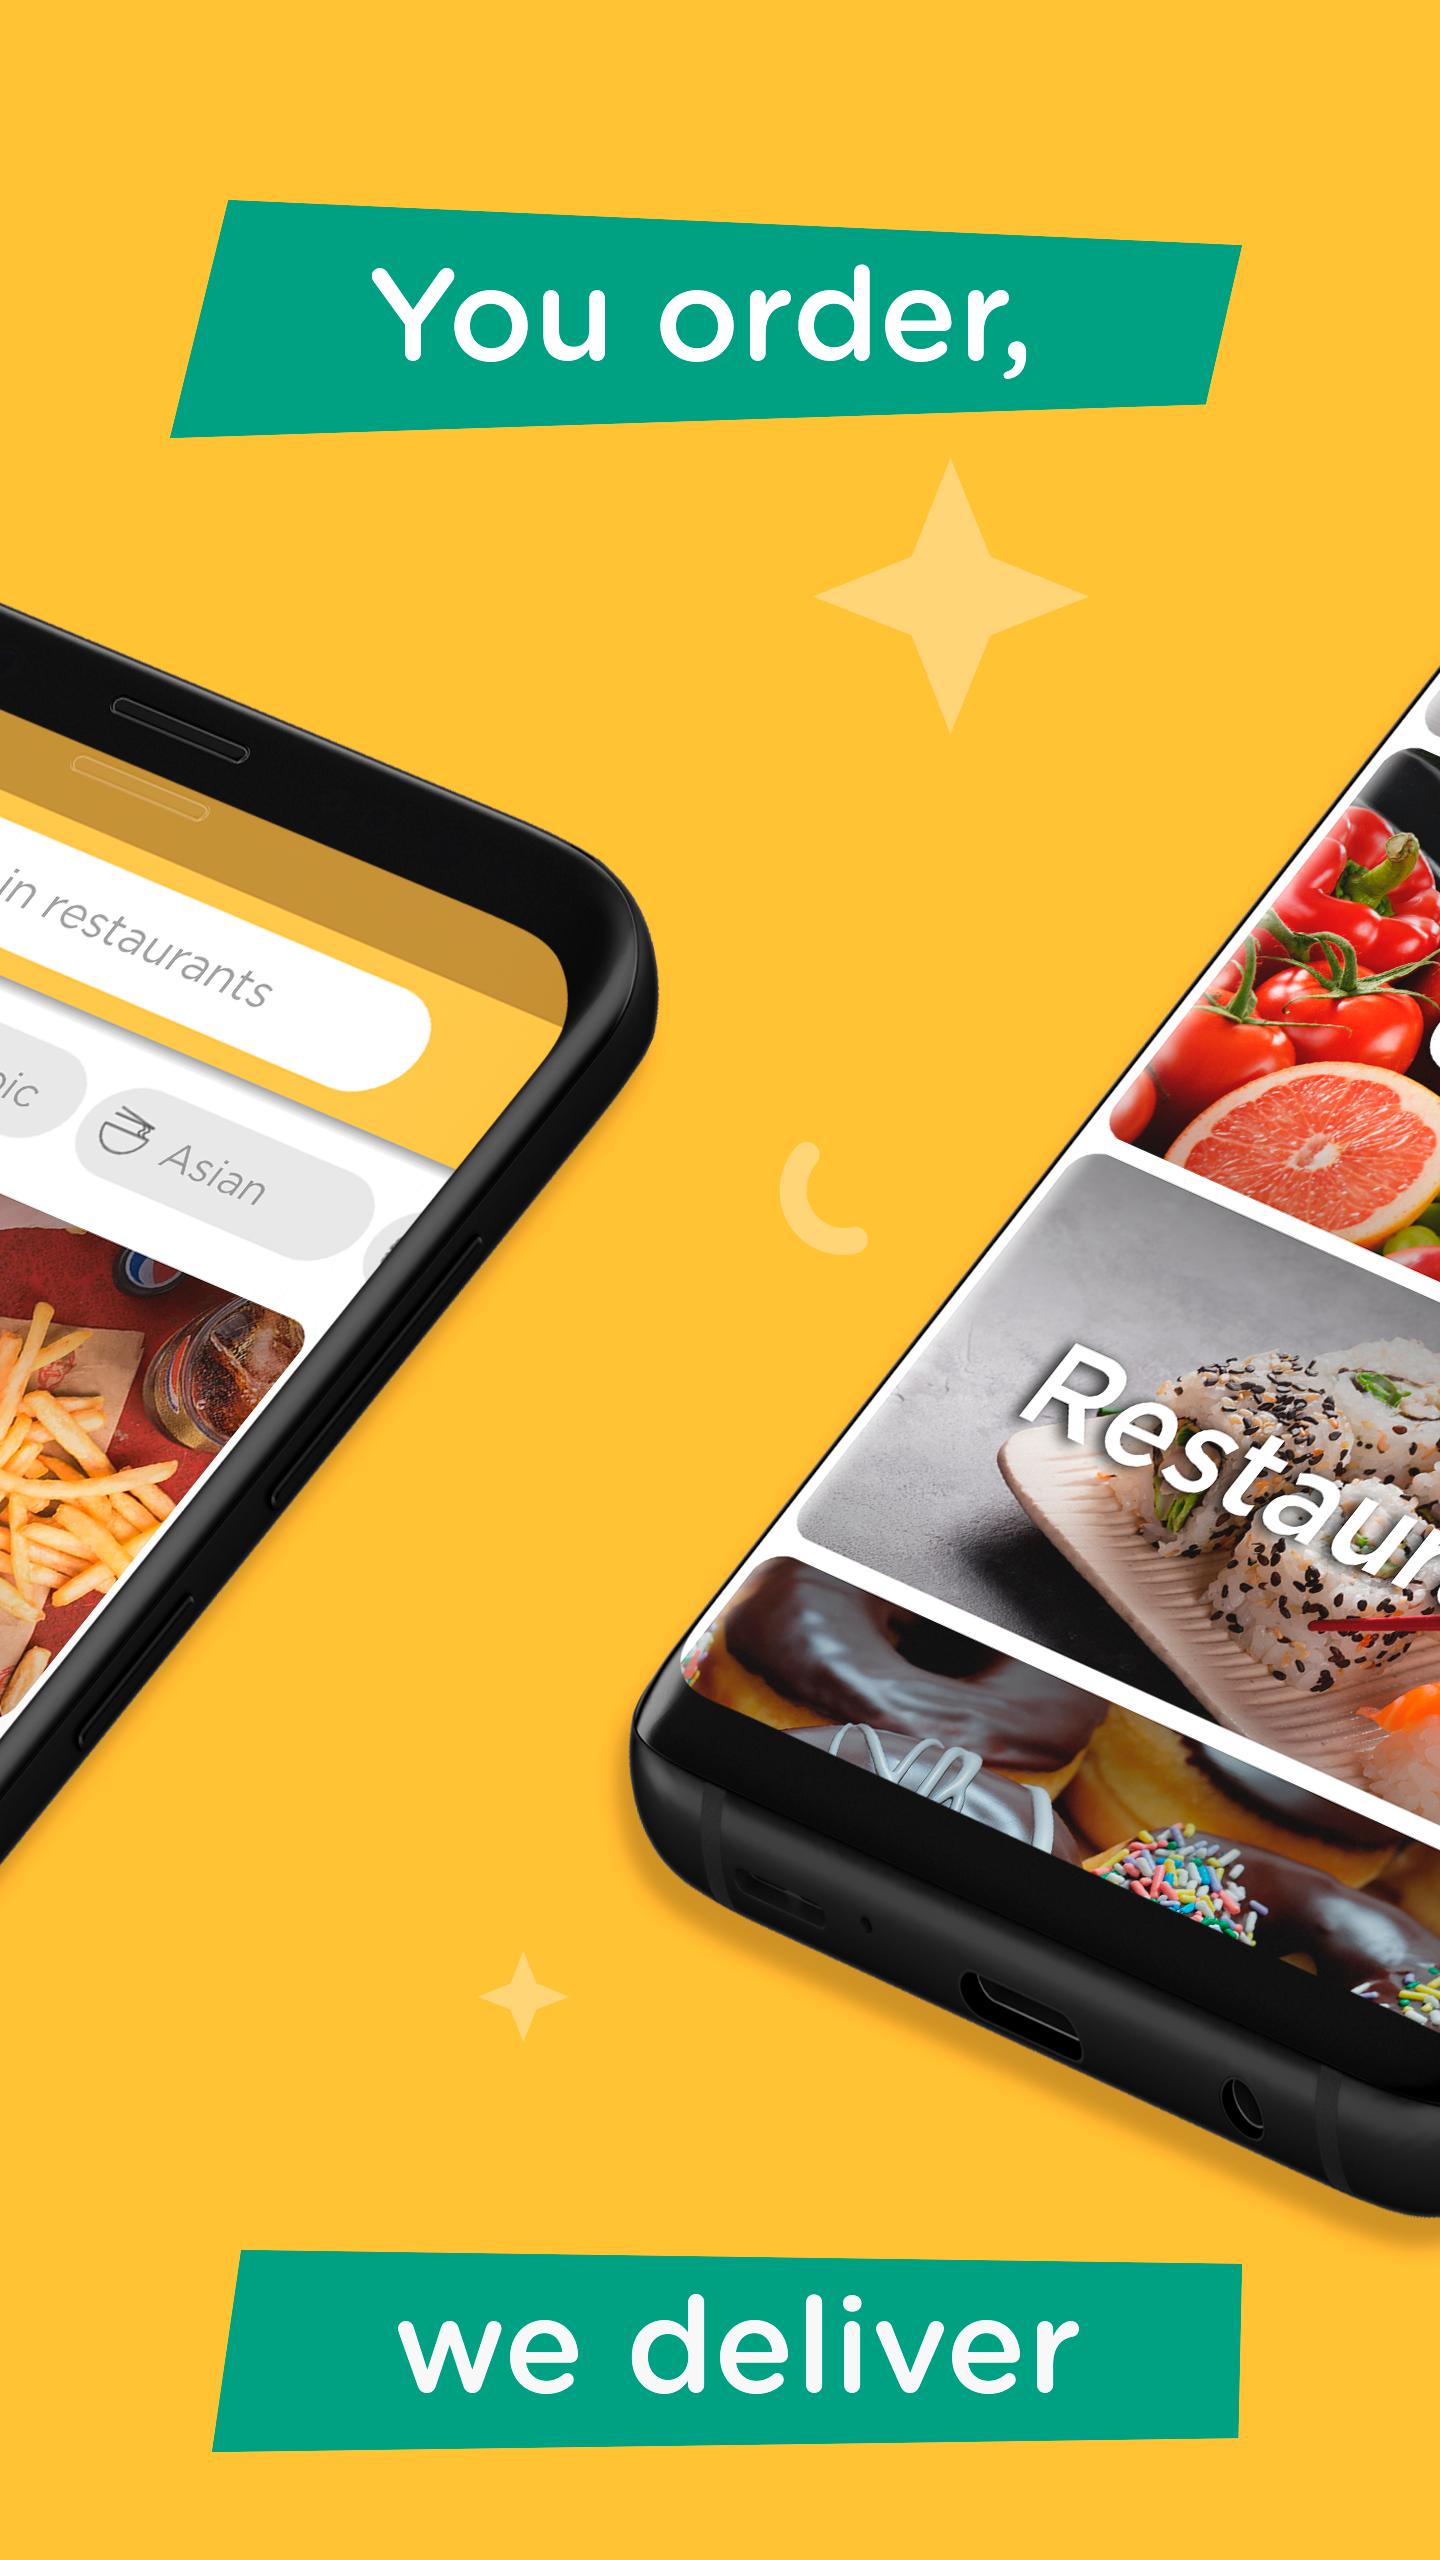 Glovo Order Anything. Food Delivery and Much More 5.94.0 Screenshot 2